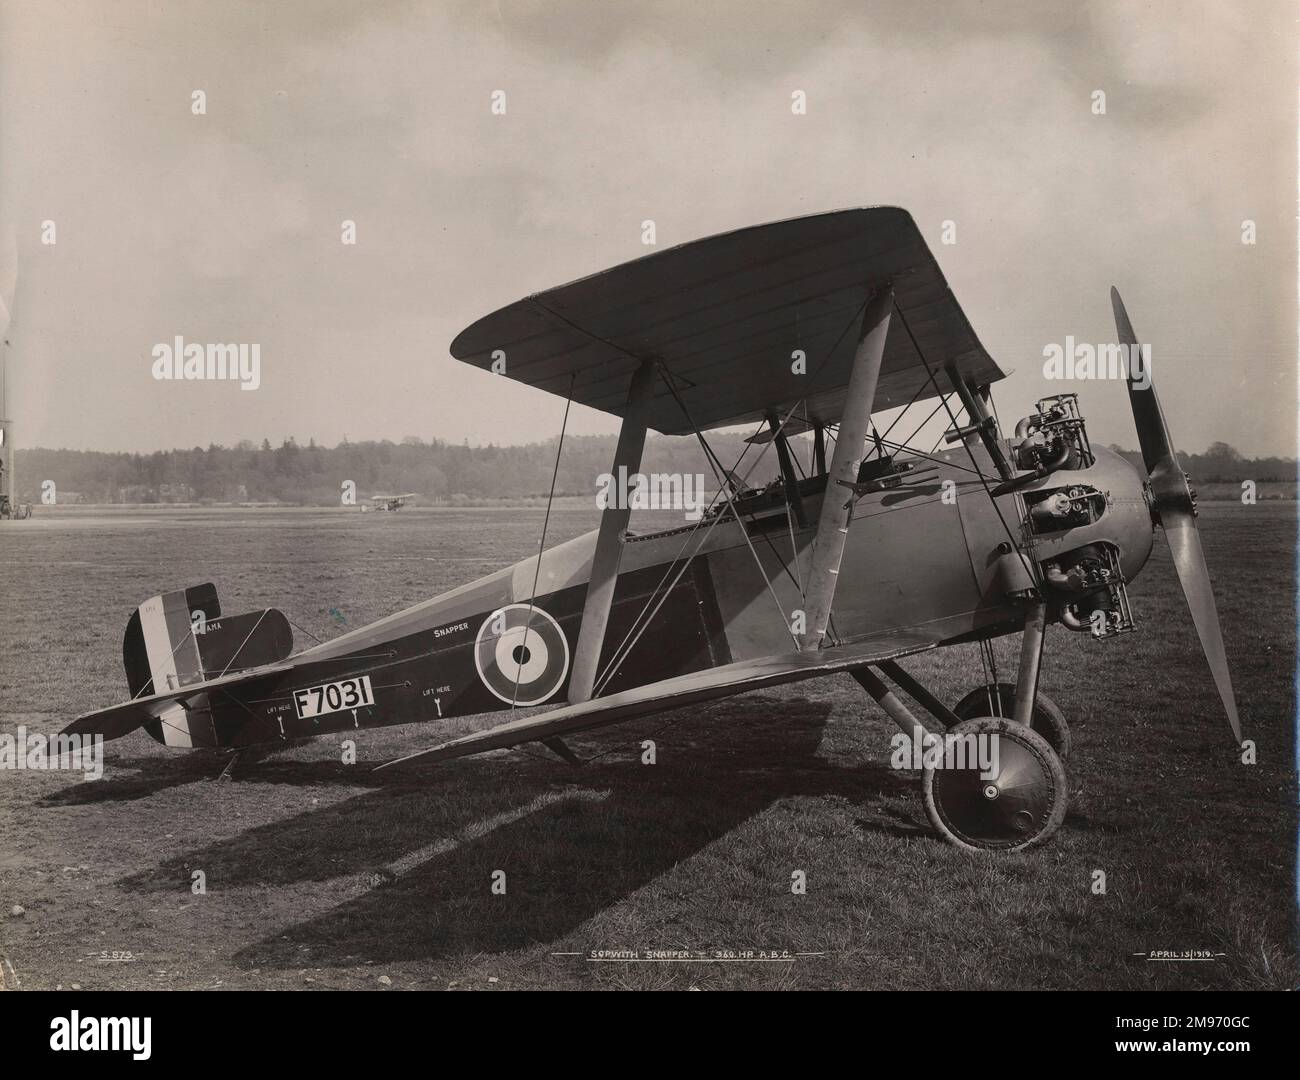 The first Sopwith Snapper, F7031. April 1919. Stock Photo